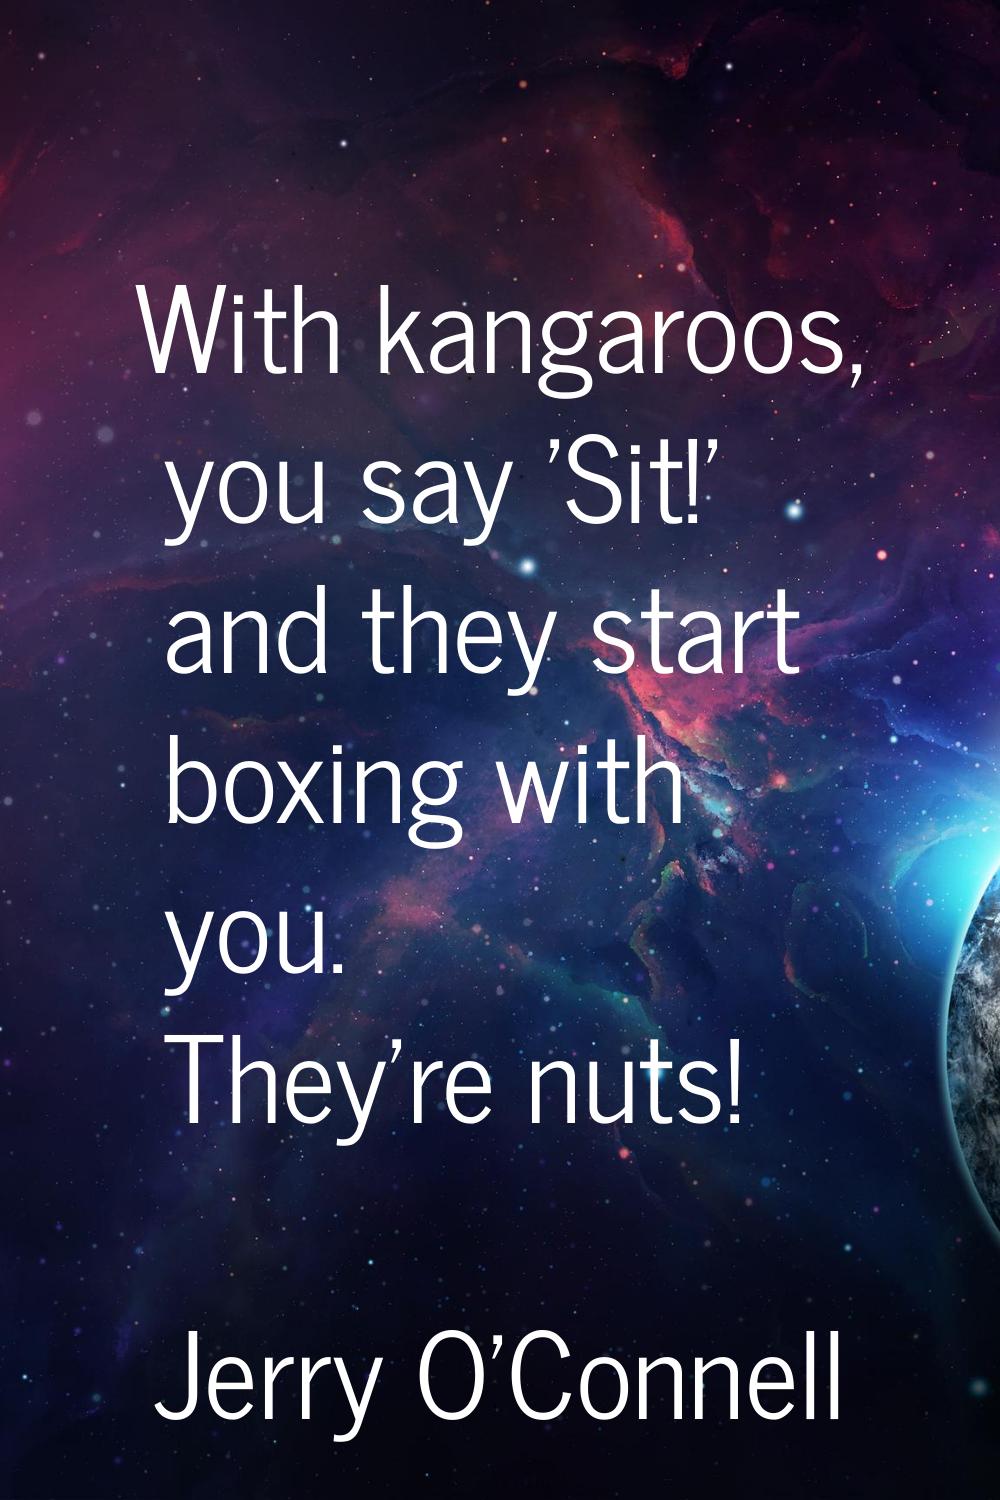 With kangaroos, you say 'Sit!' and they start boxing with you. They're nuts!